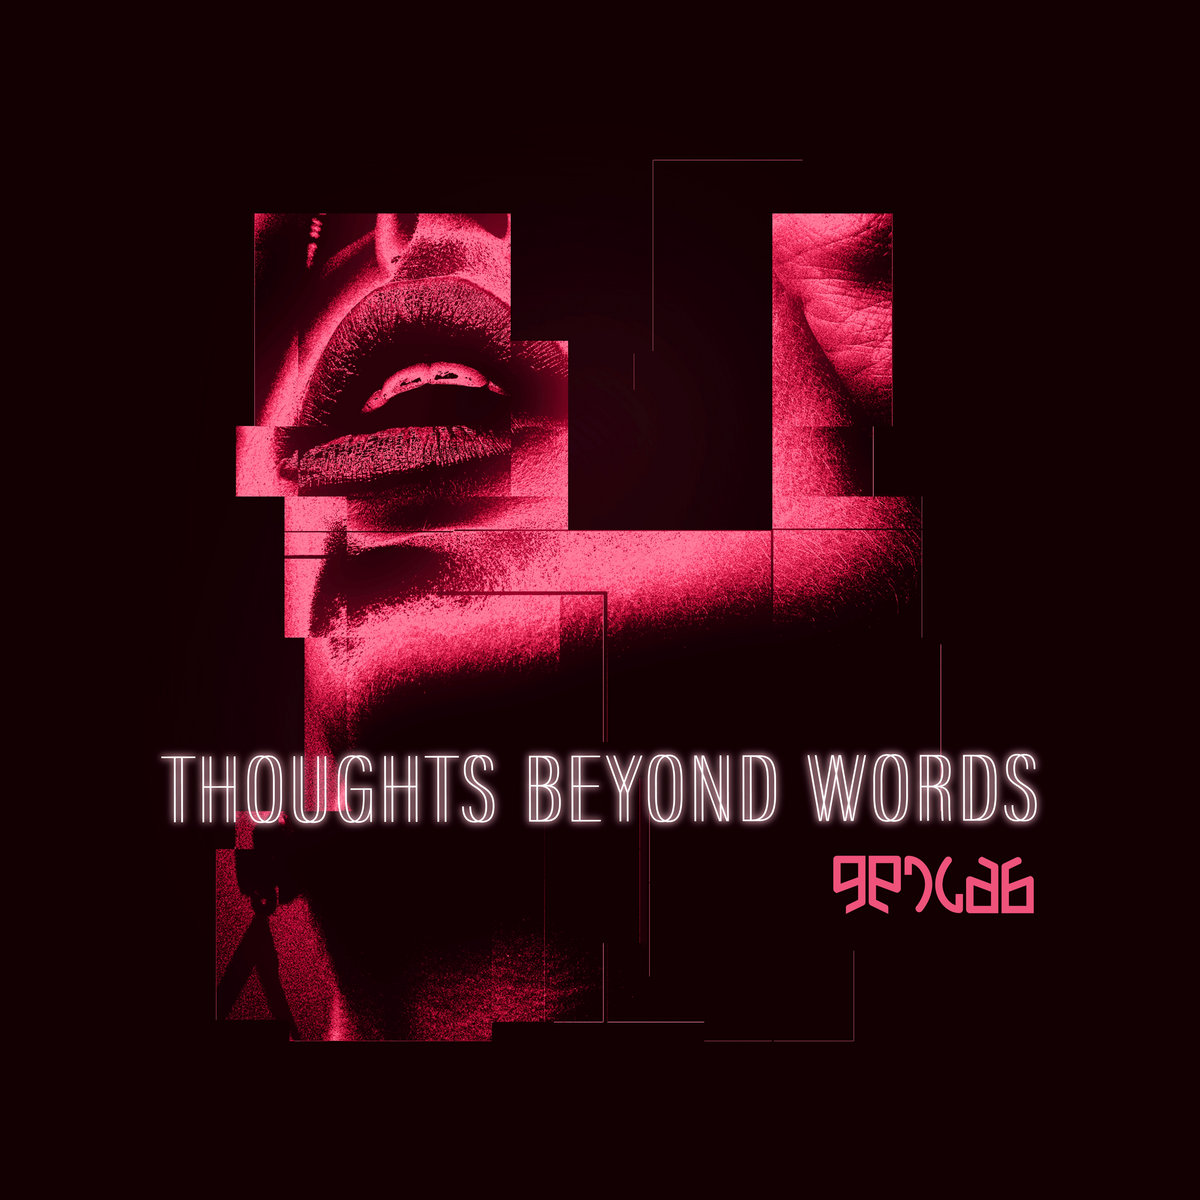 genCAB, “Thoughts Beyond Words”